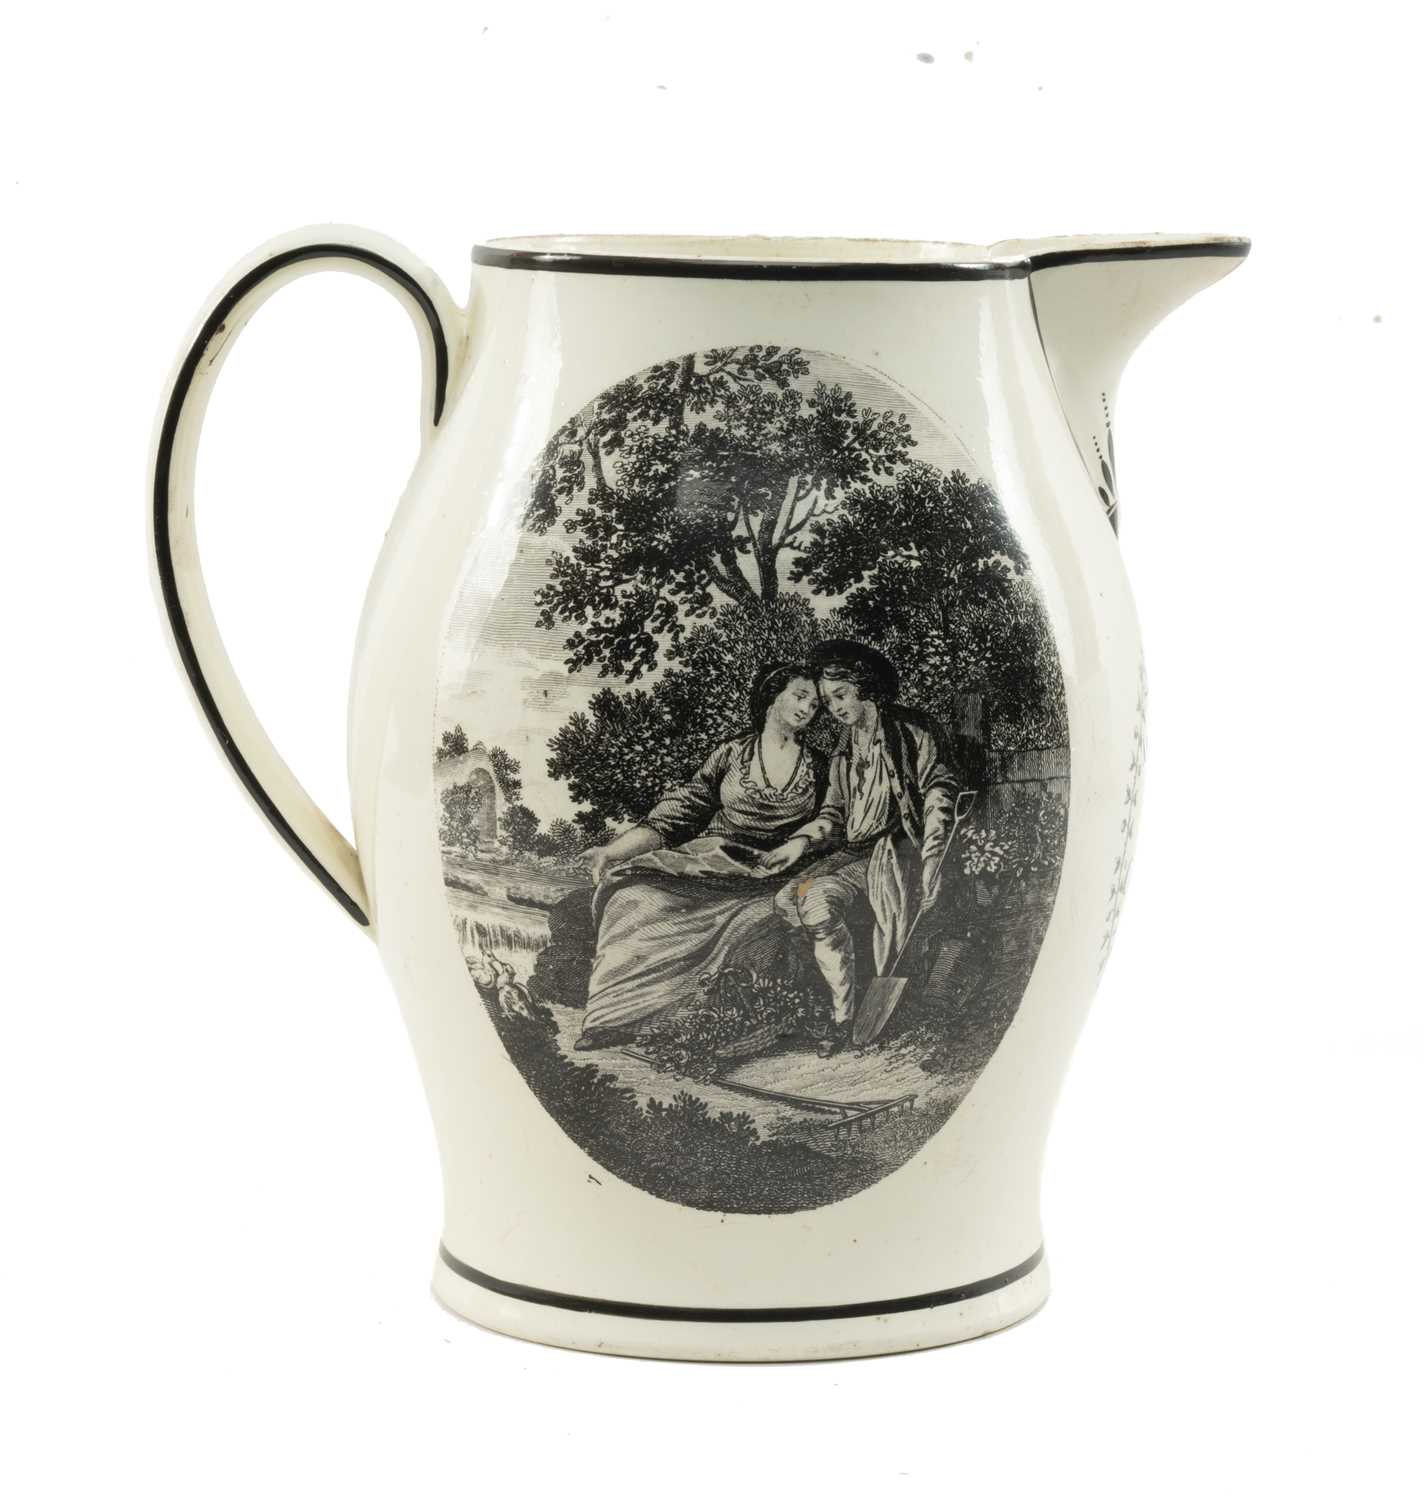 LIVERPOOL CREAMWARE 'NAMED' JUG OF CARDIGANSHIRE INTEREST c.1810, probably Herculaneum, printed in - Image 2 of 2